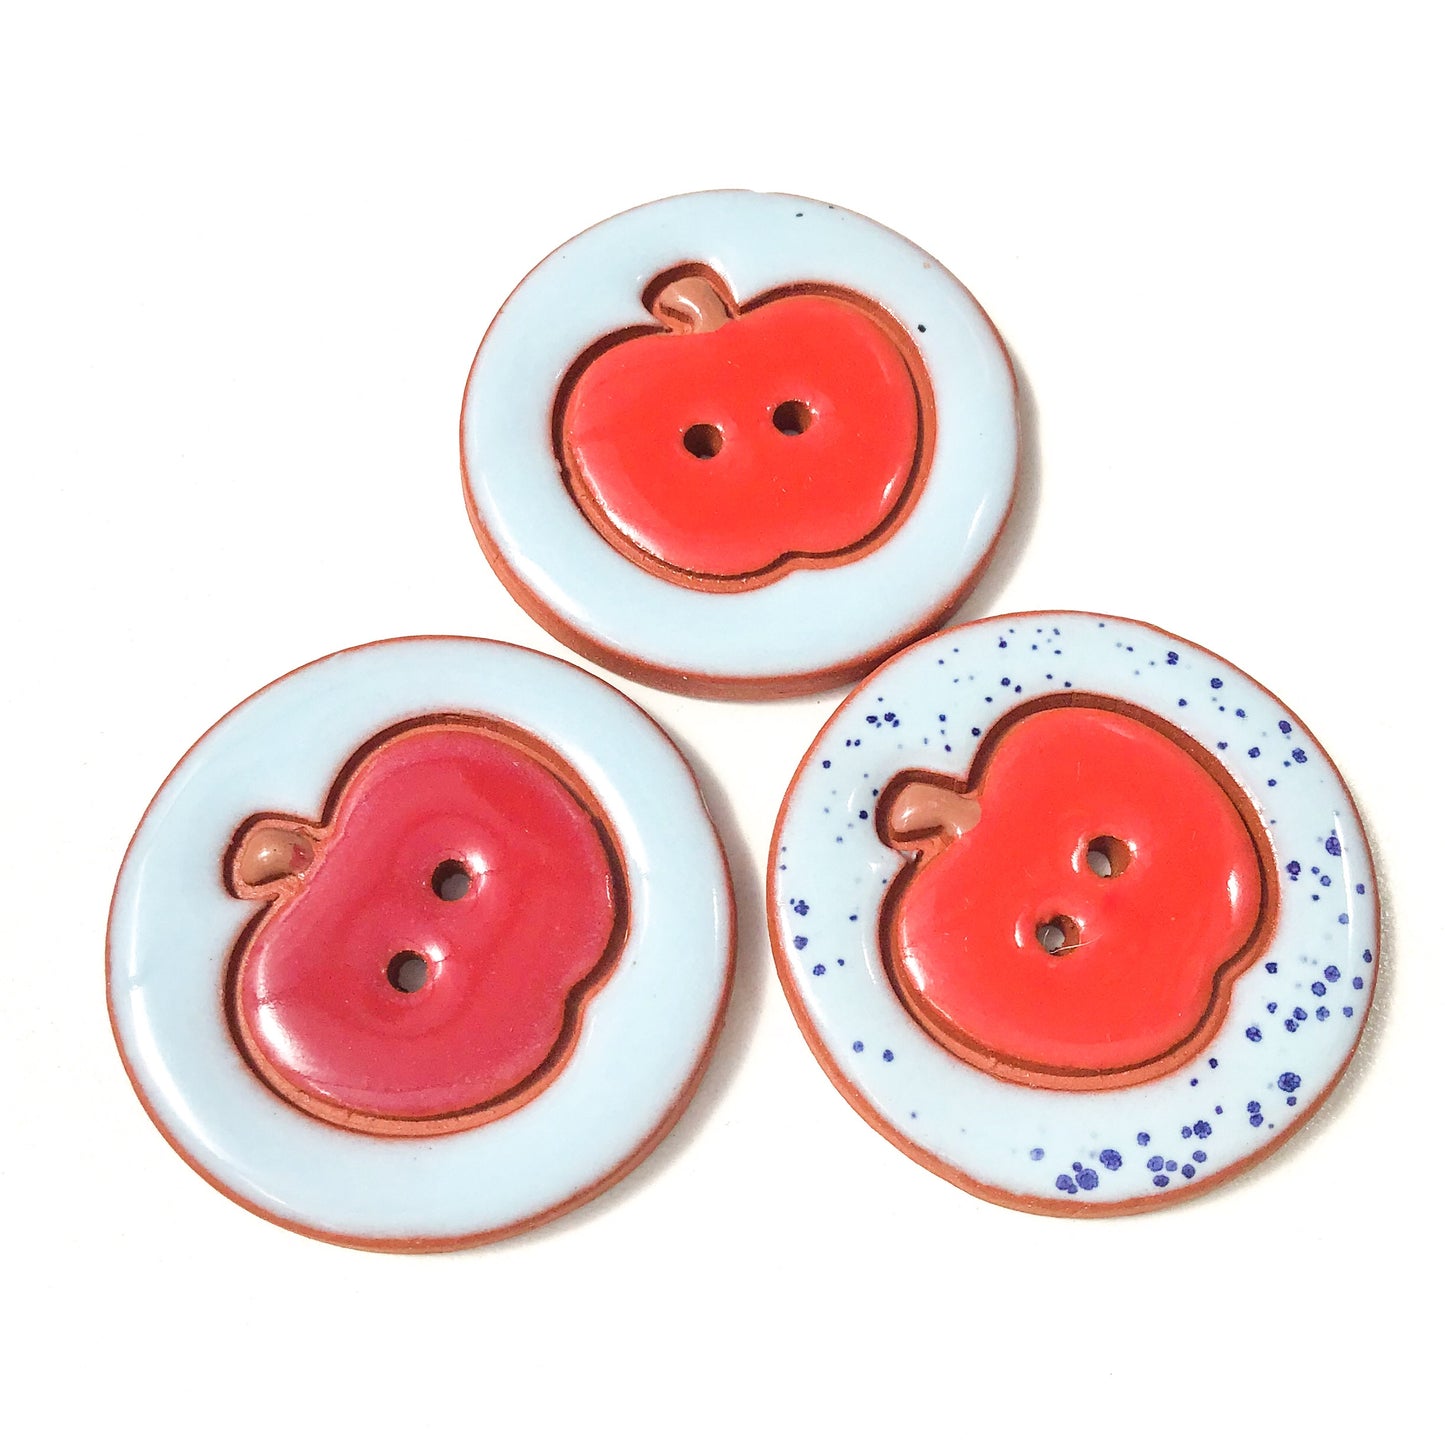 Ceramic Apple Buttons - Clay Apple Buttons - 1 7/16"